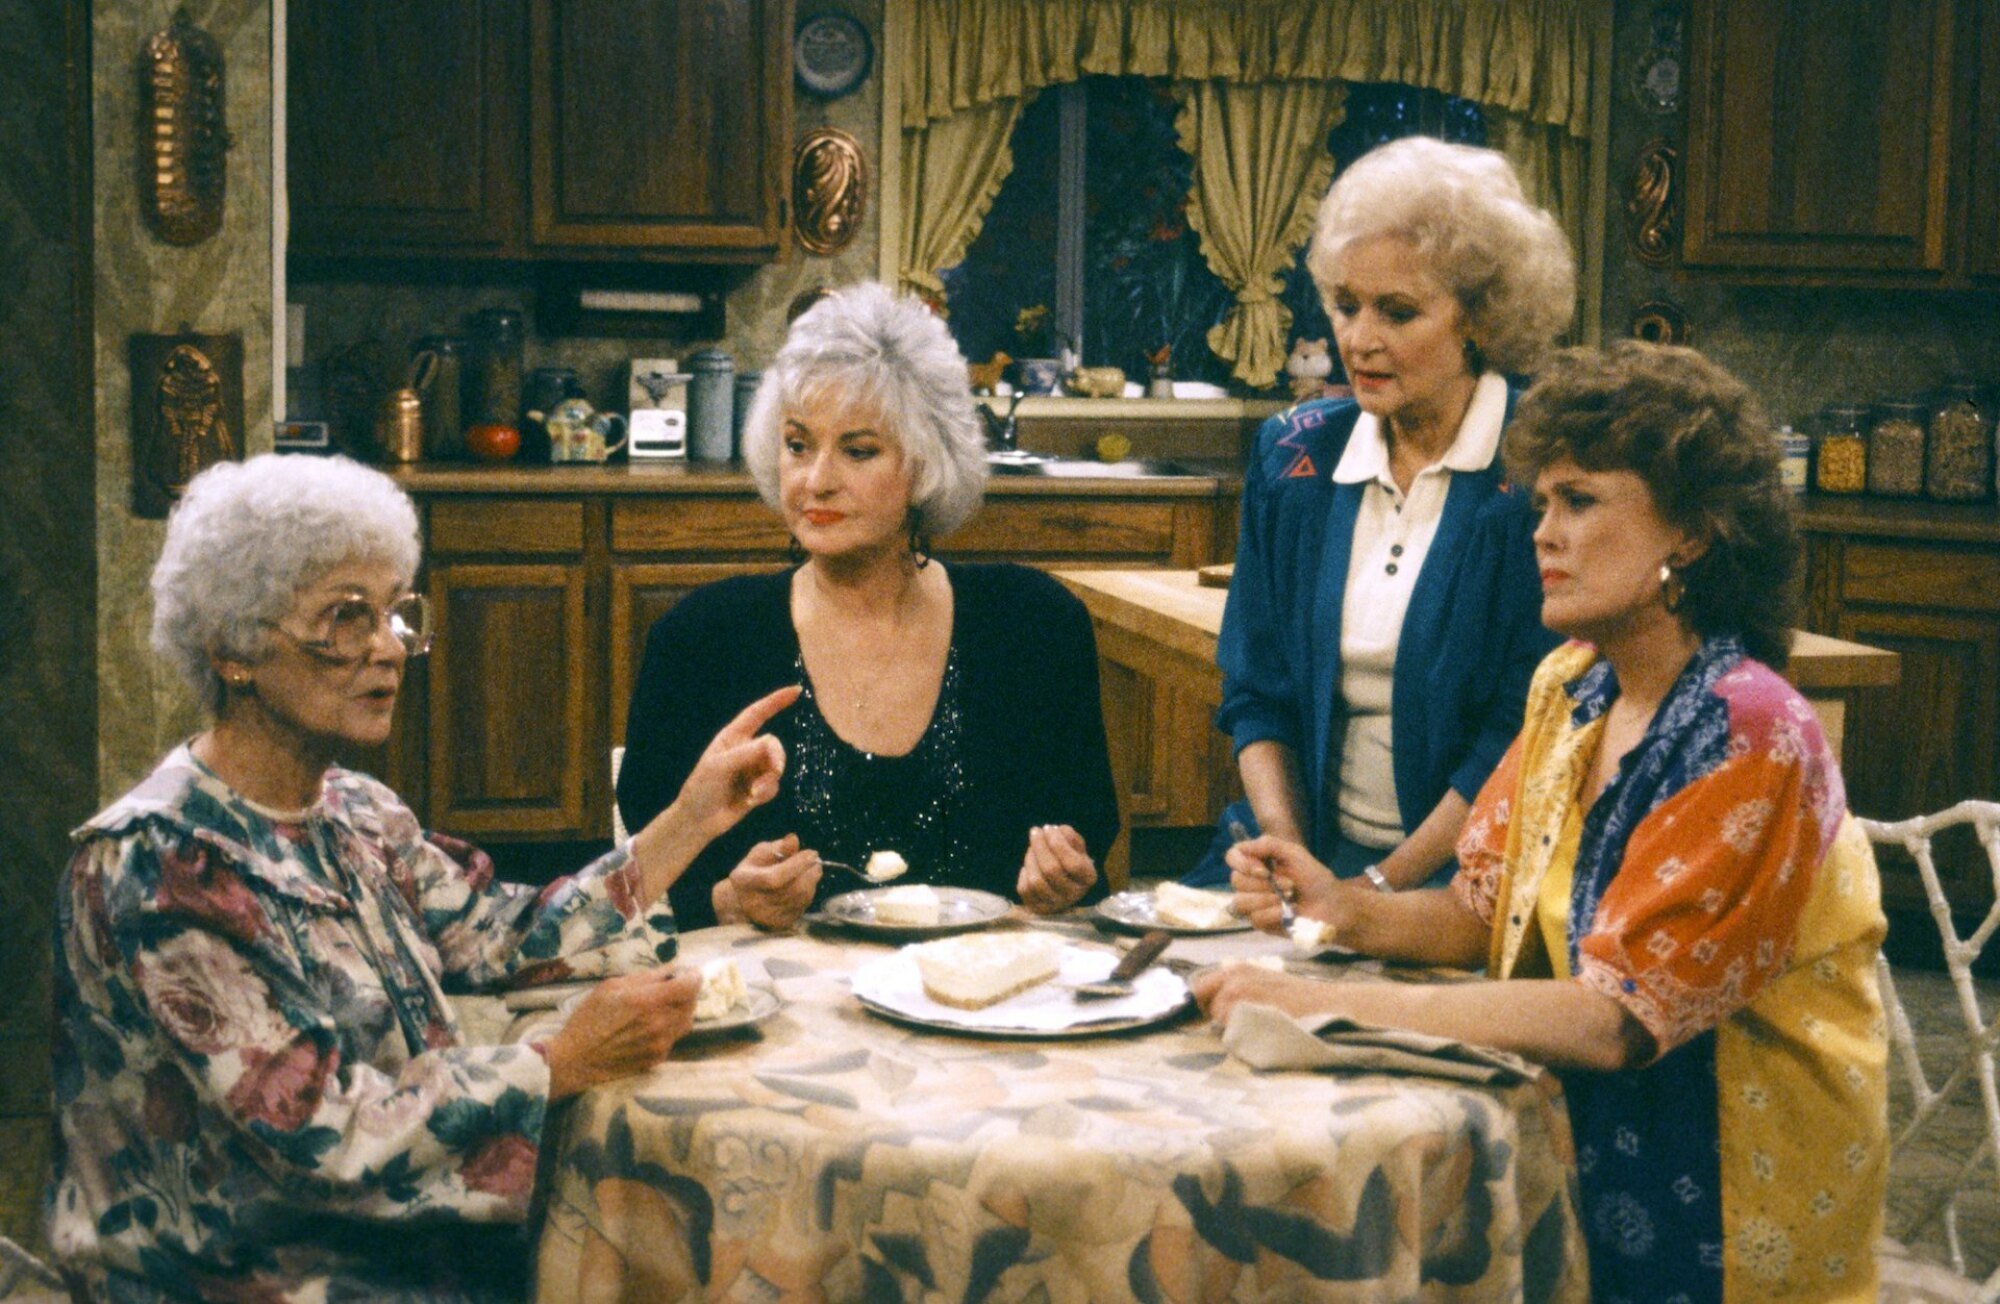 Estelle Getty, Bea Arthur, Betty White, and Rue McClanahan in "The Golden Girls" 